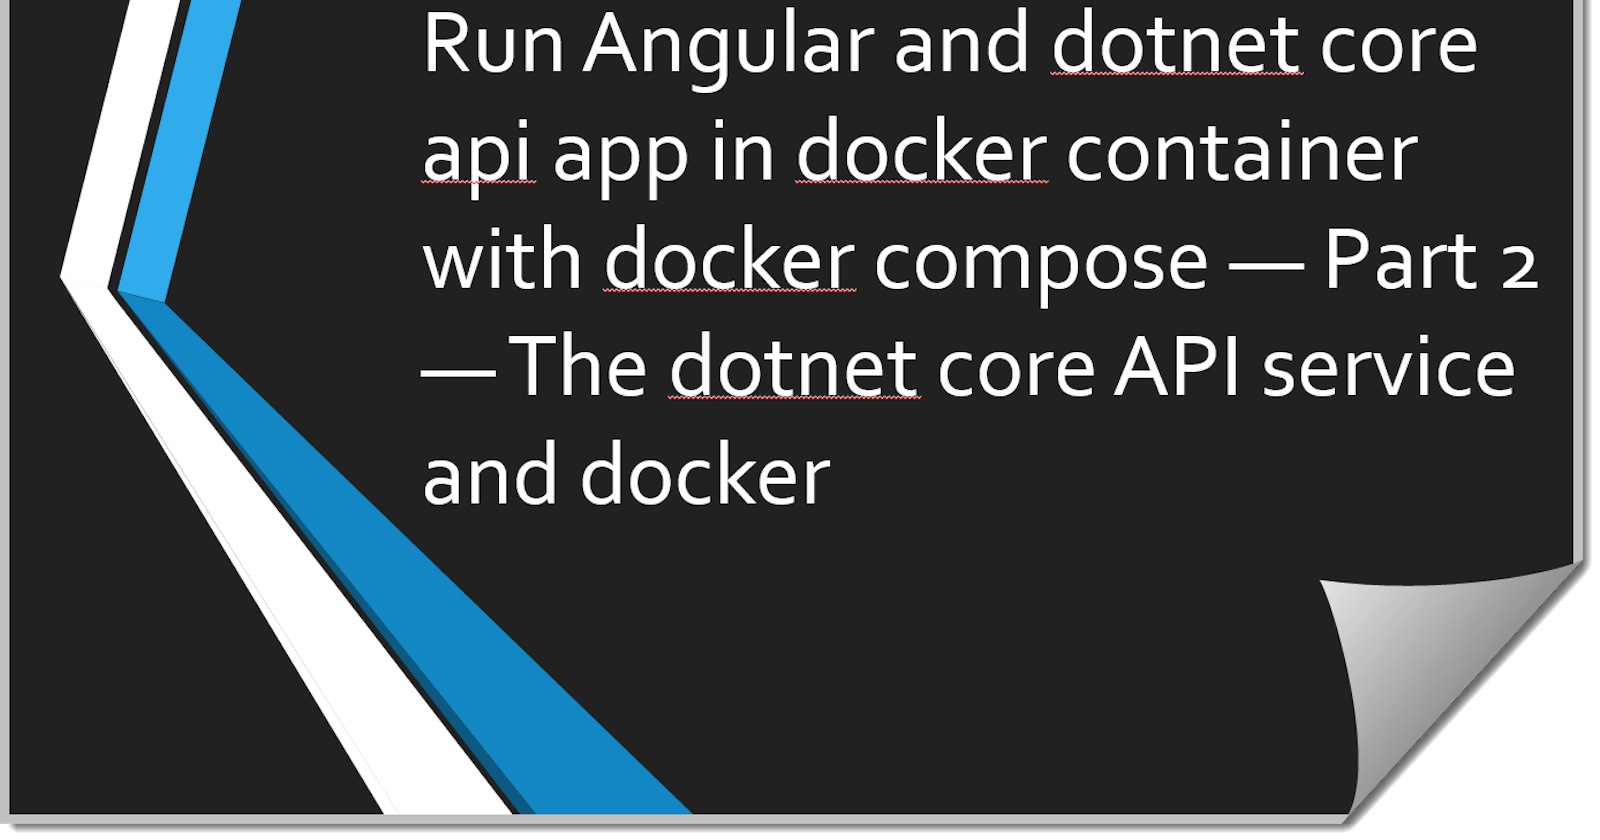 Run Angular and dotnet core api app in docker container with docker compose — Part 2 — The dotnet core API service and docker